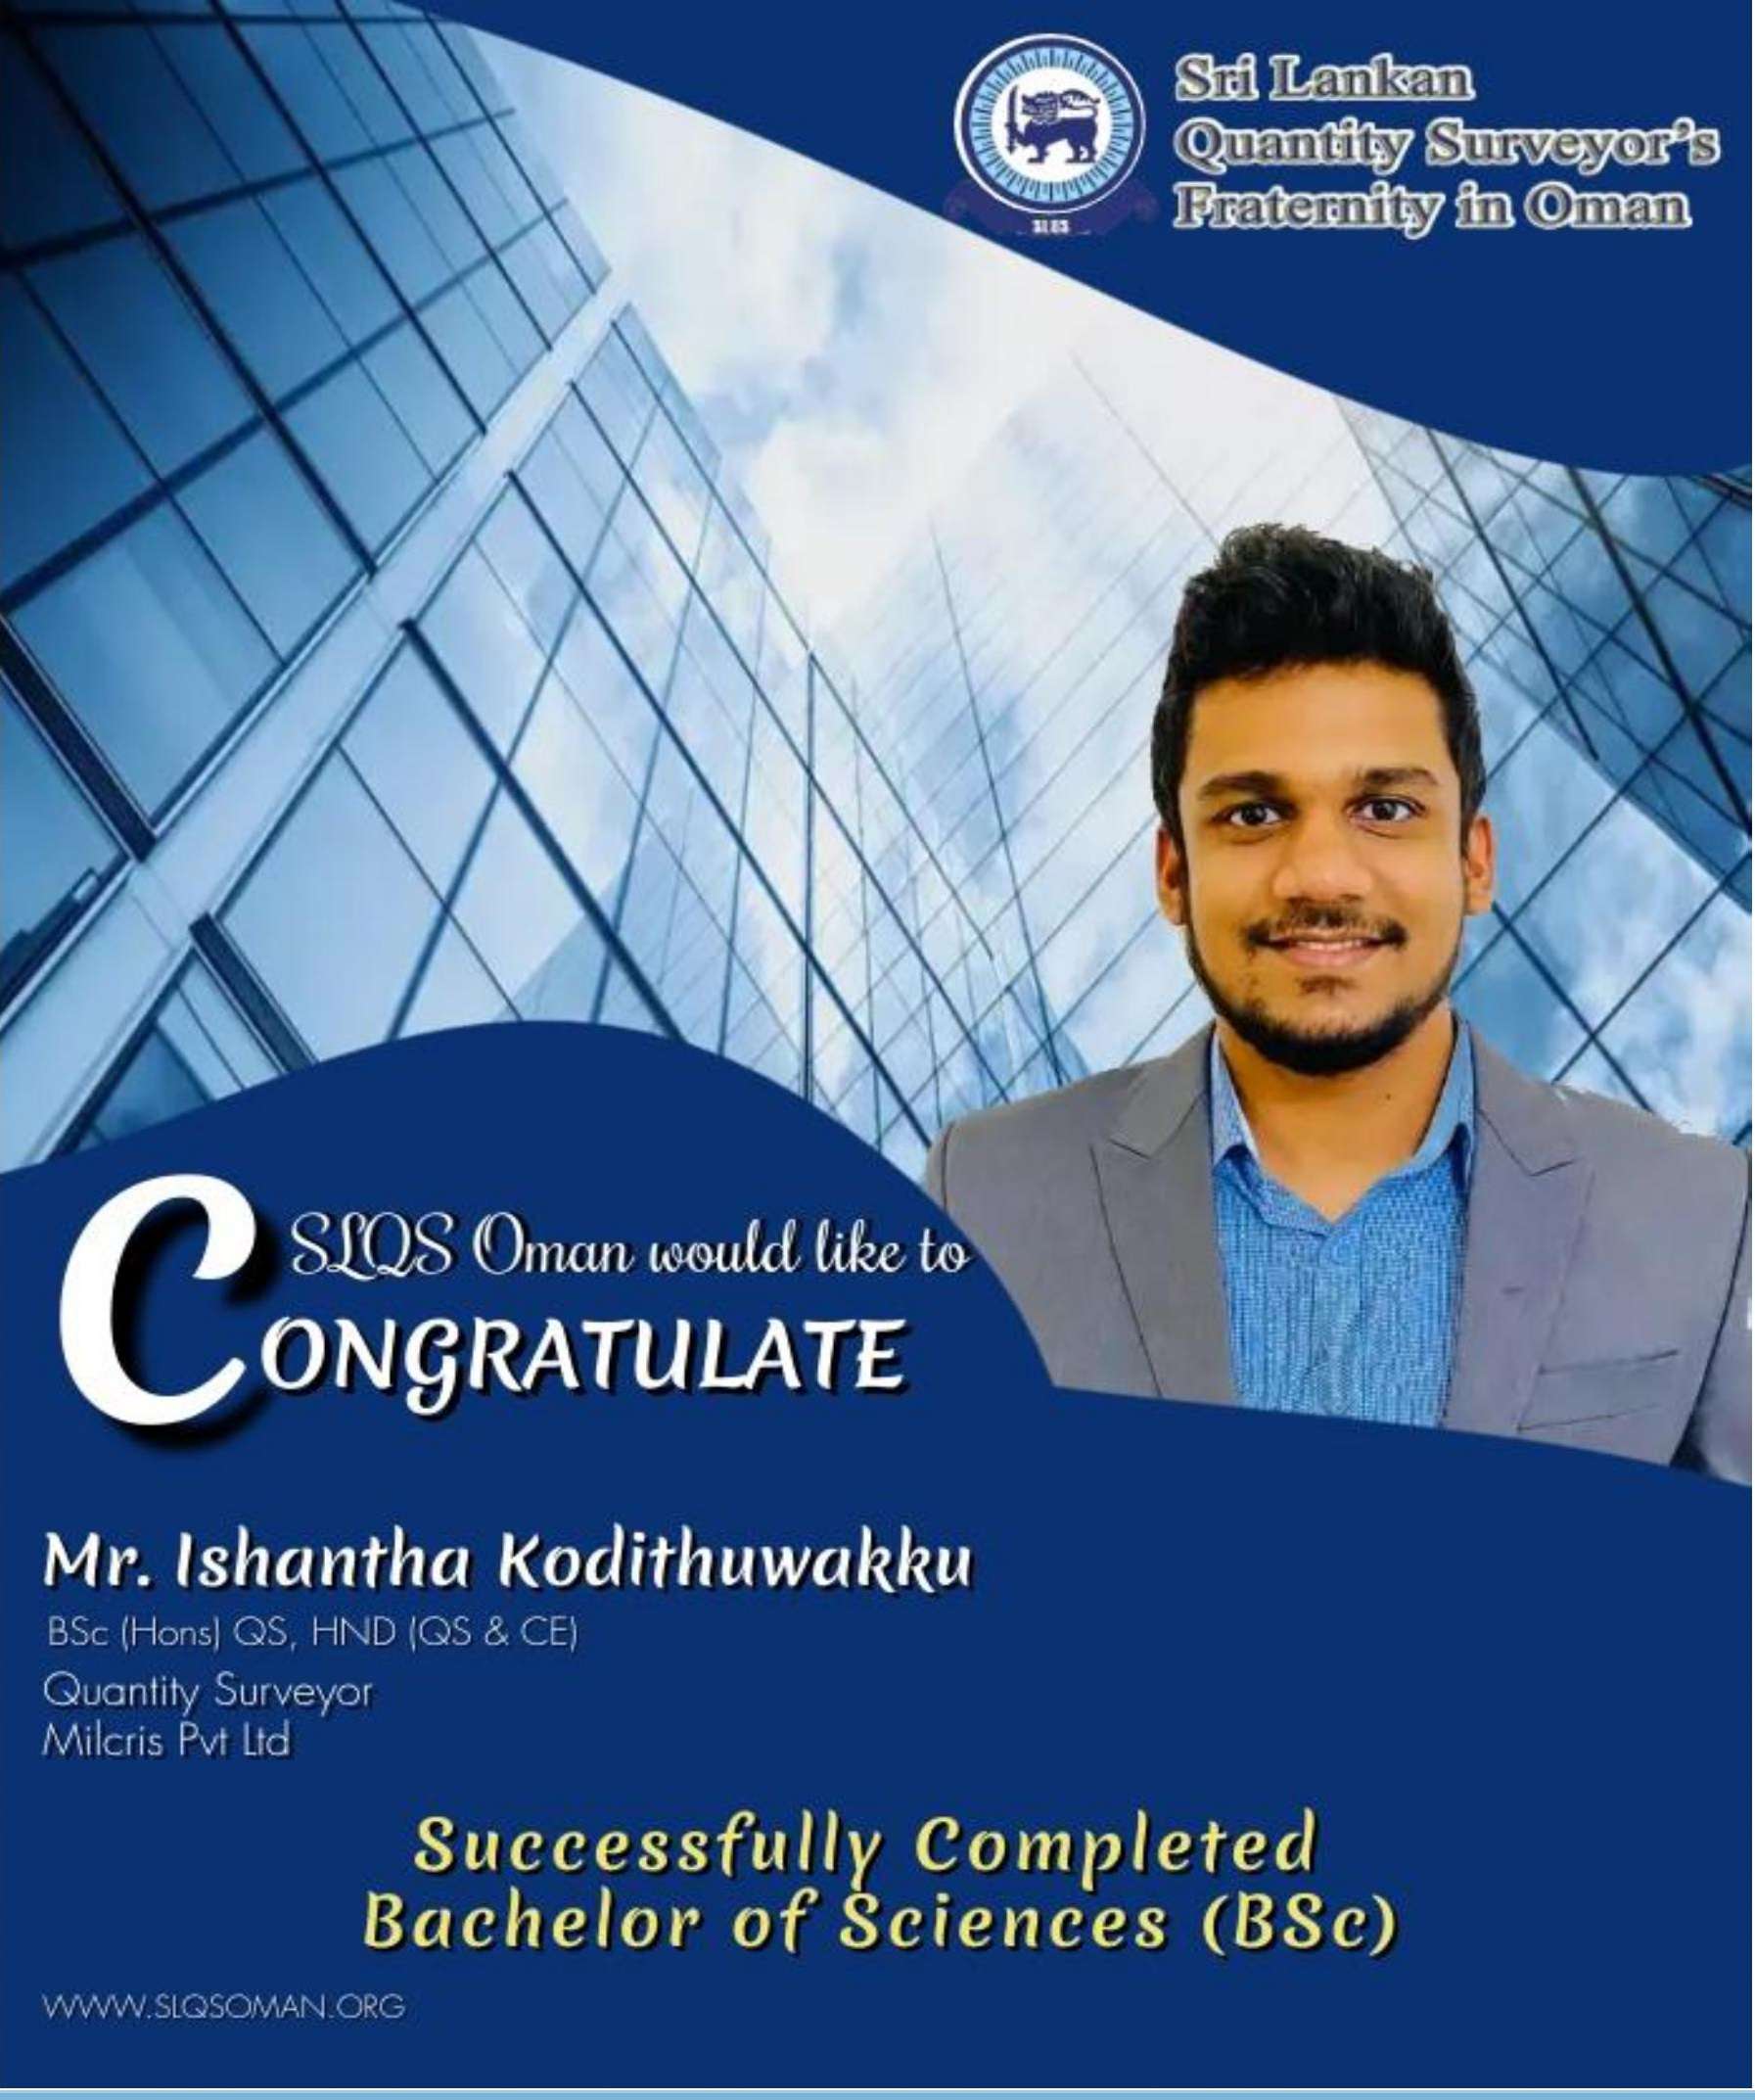 Congratulations!! Mr. Ishantha Kadithuwakku!! For successfully completion of BSc.